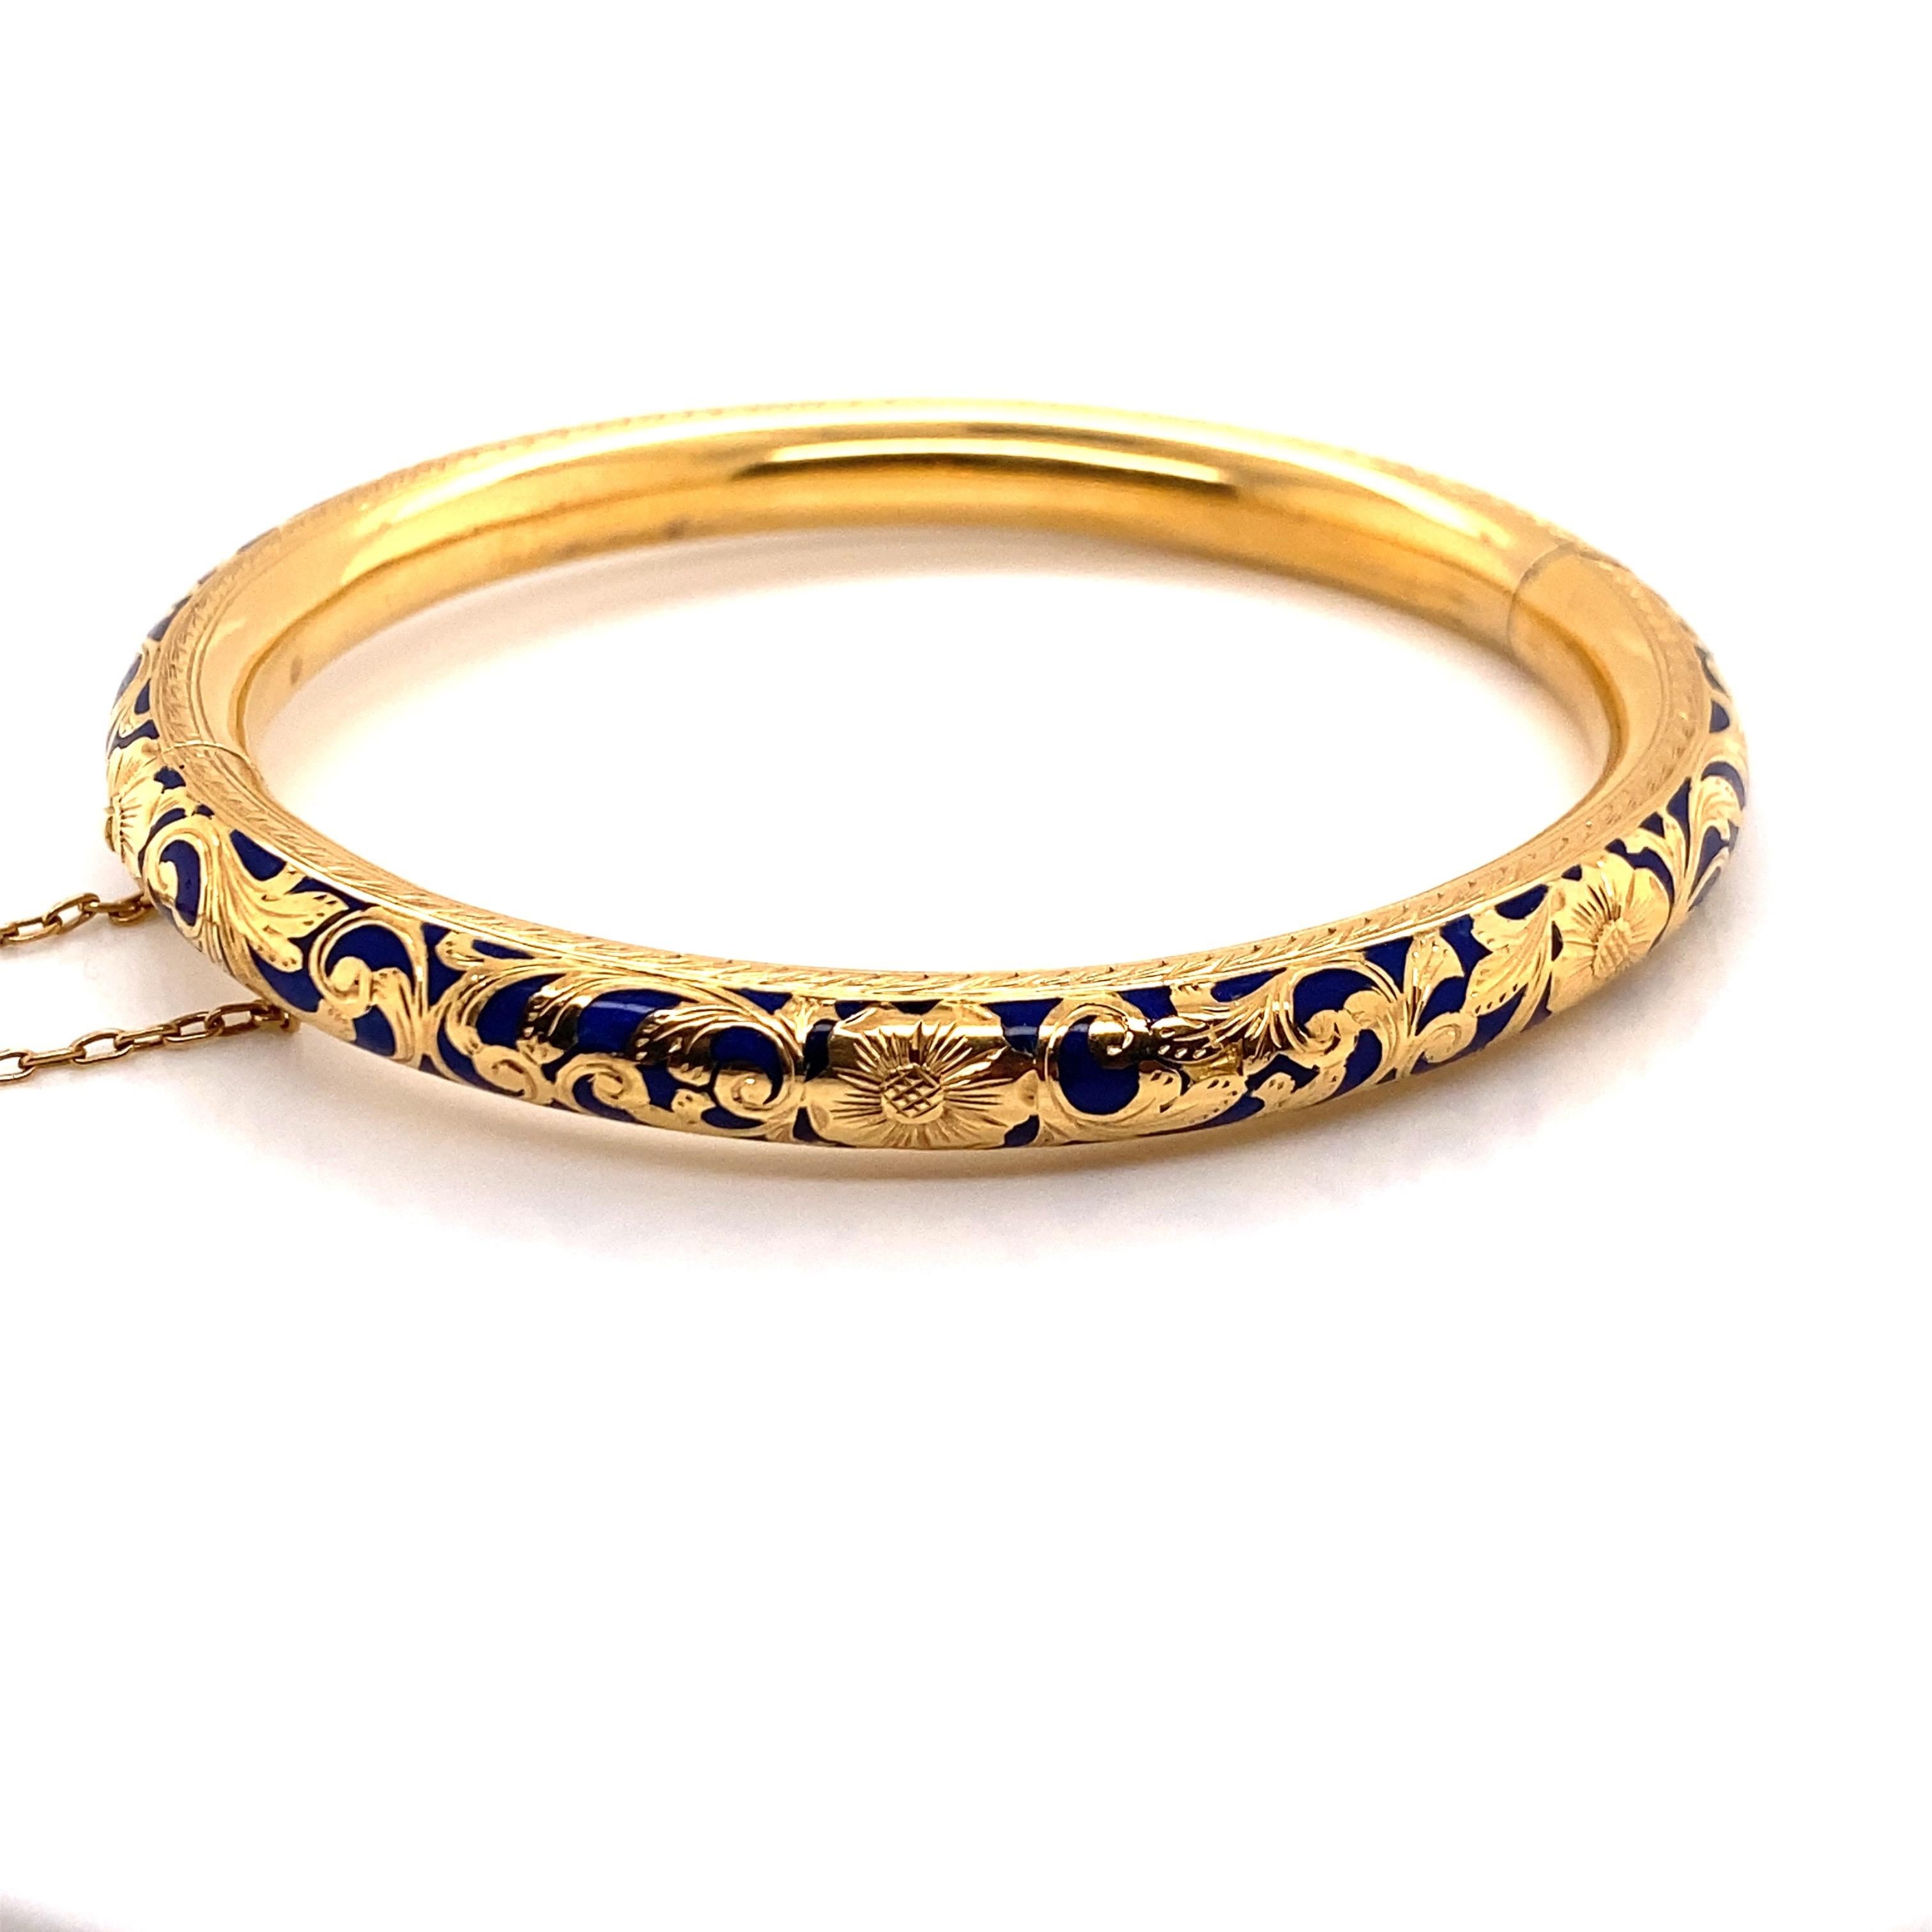 Vintage 18K Yellow Gold Floral Bangle with Blue Enamel. The color of the enamel is cobalt blue and the gold flowers and leaves are engraved. The bangle is 7.2mm wide and 6.8mm high off the wrist. The inside diameter is 2.2 inches high and 2.4 inches